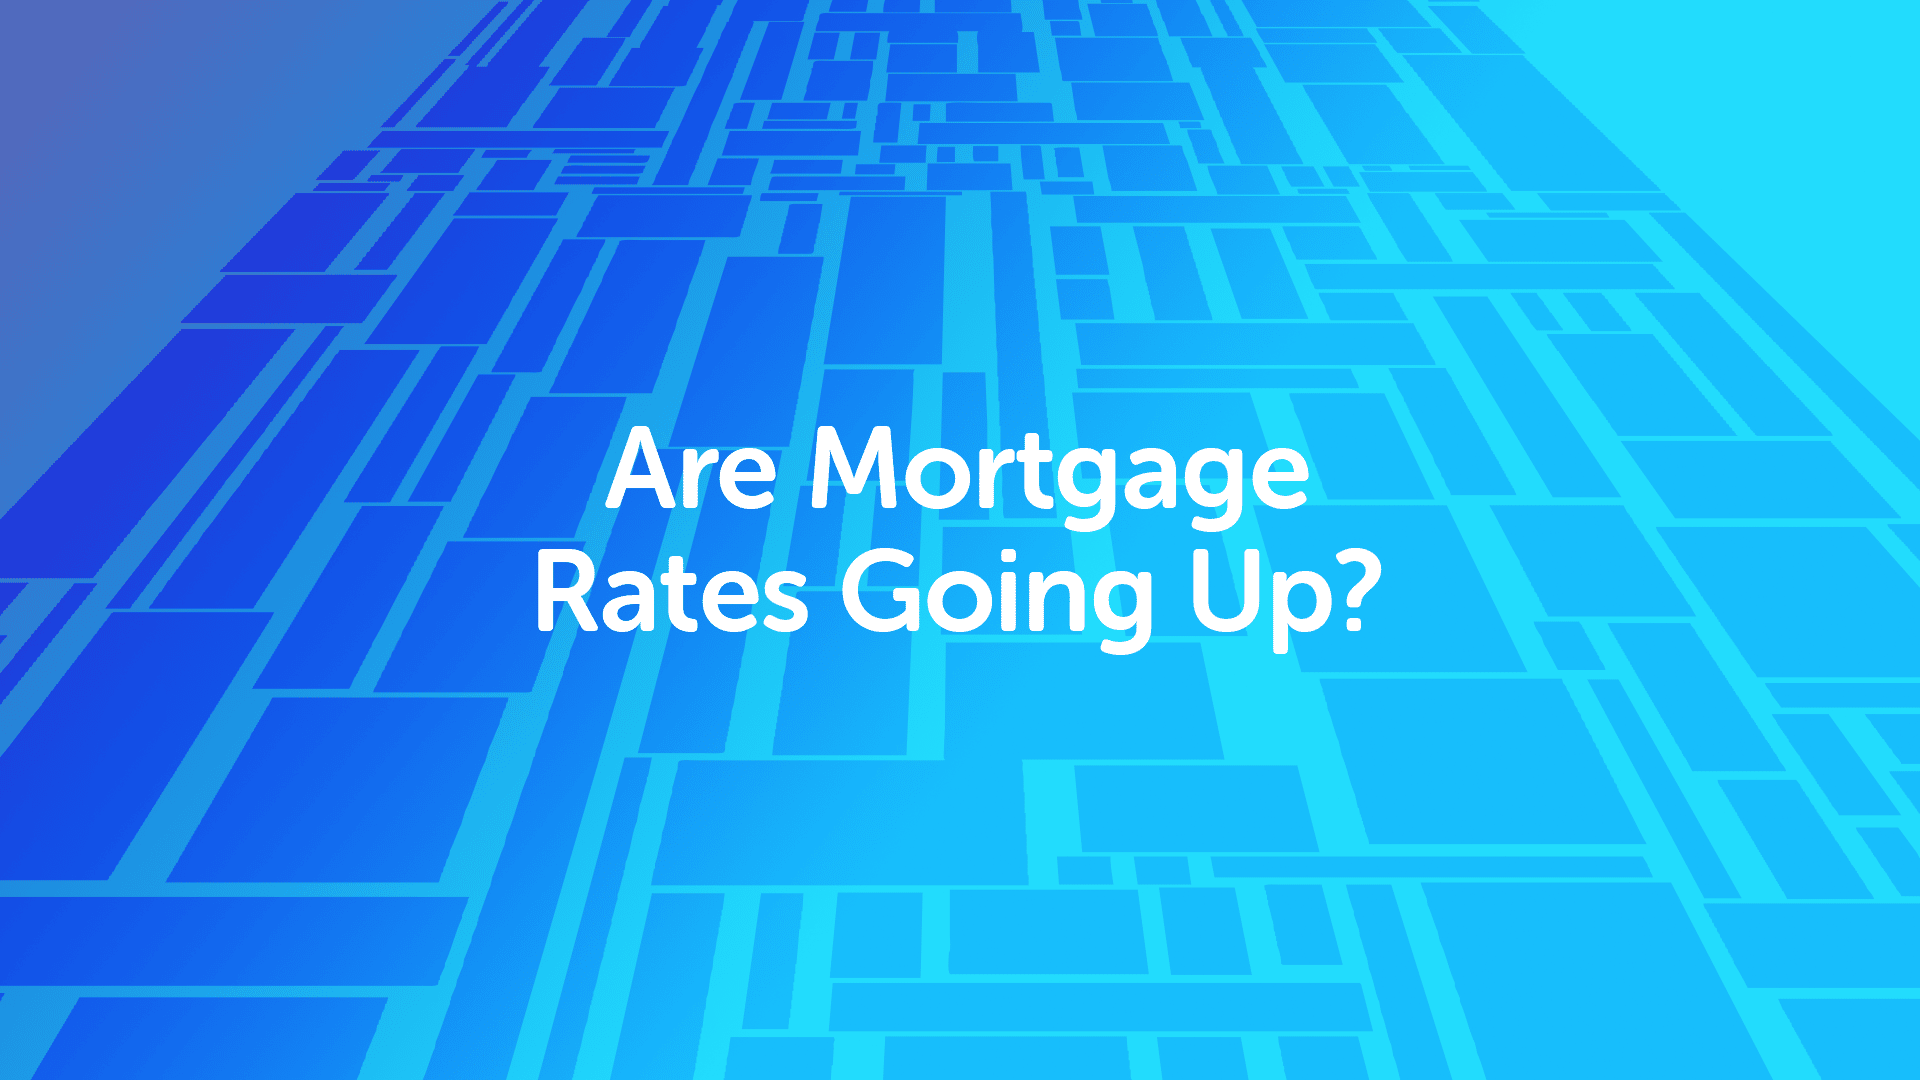 Are Mortgage Rates Going Up in Nottingham